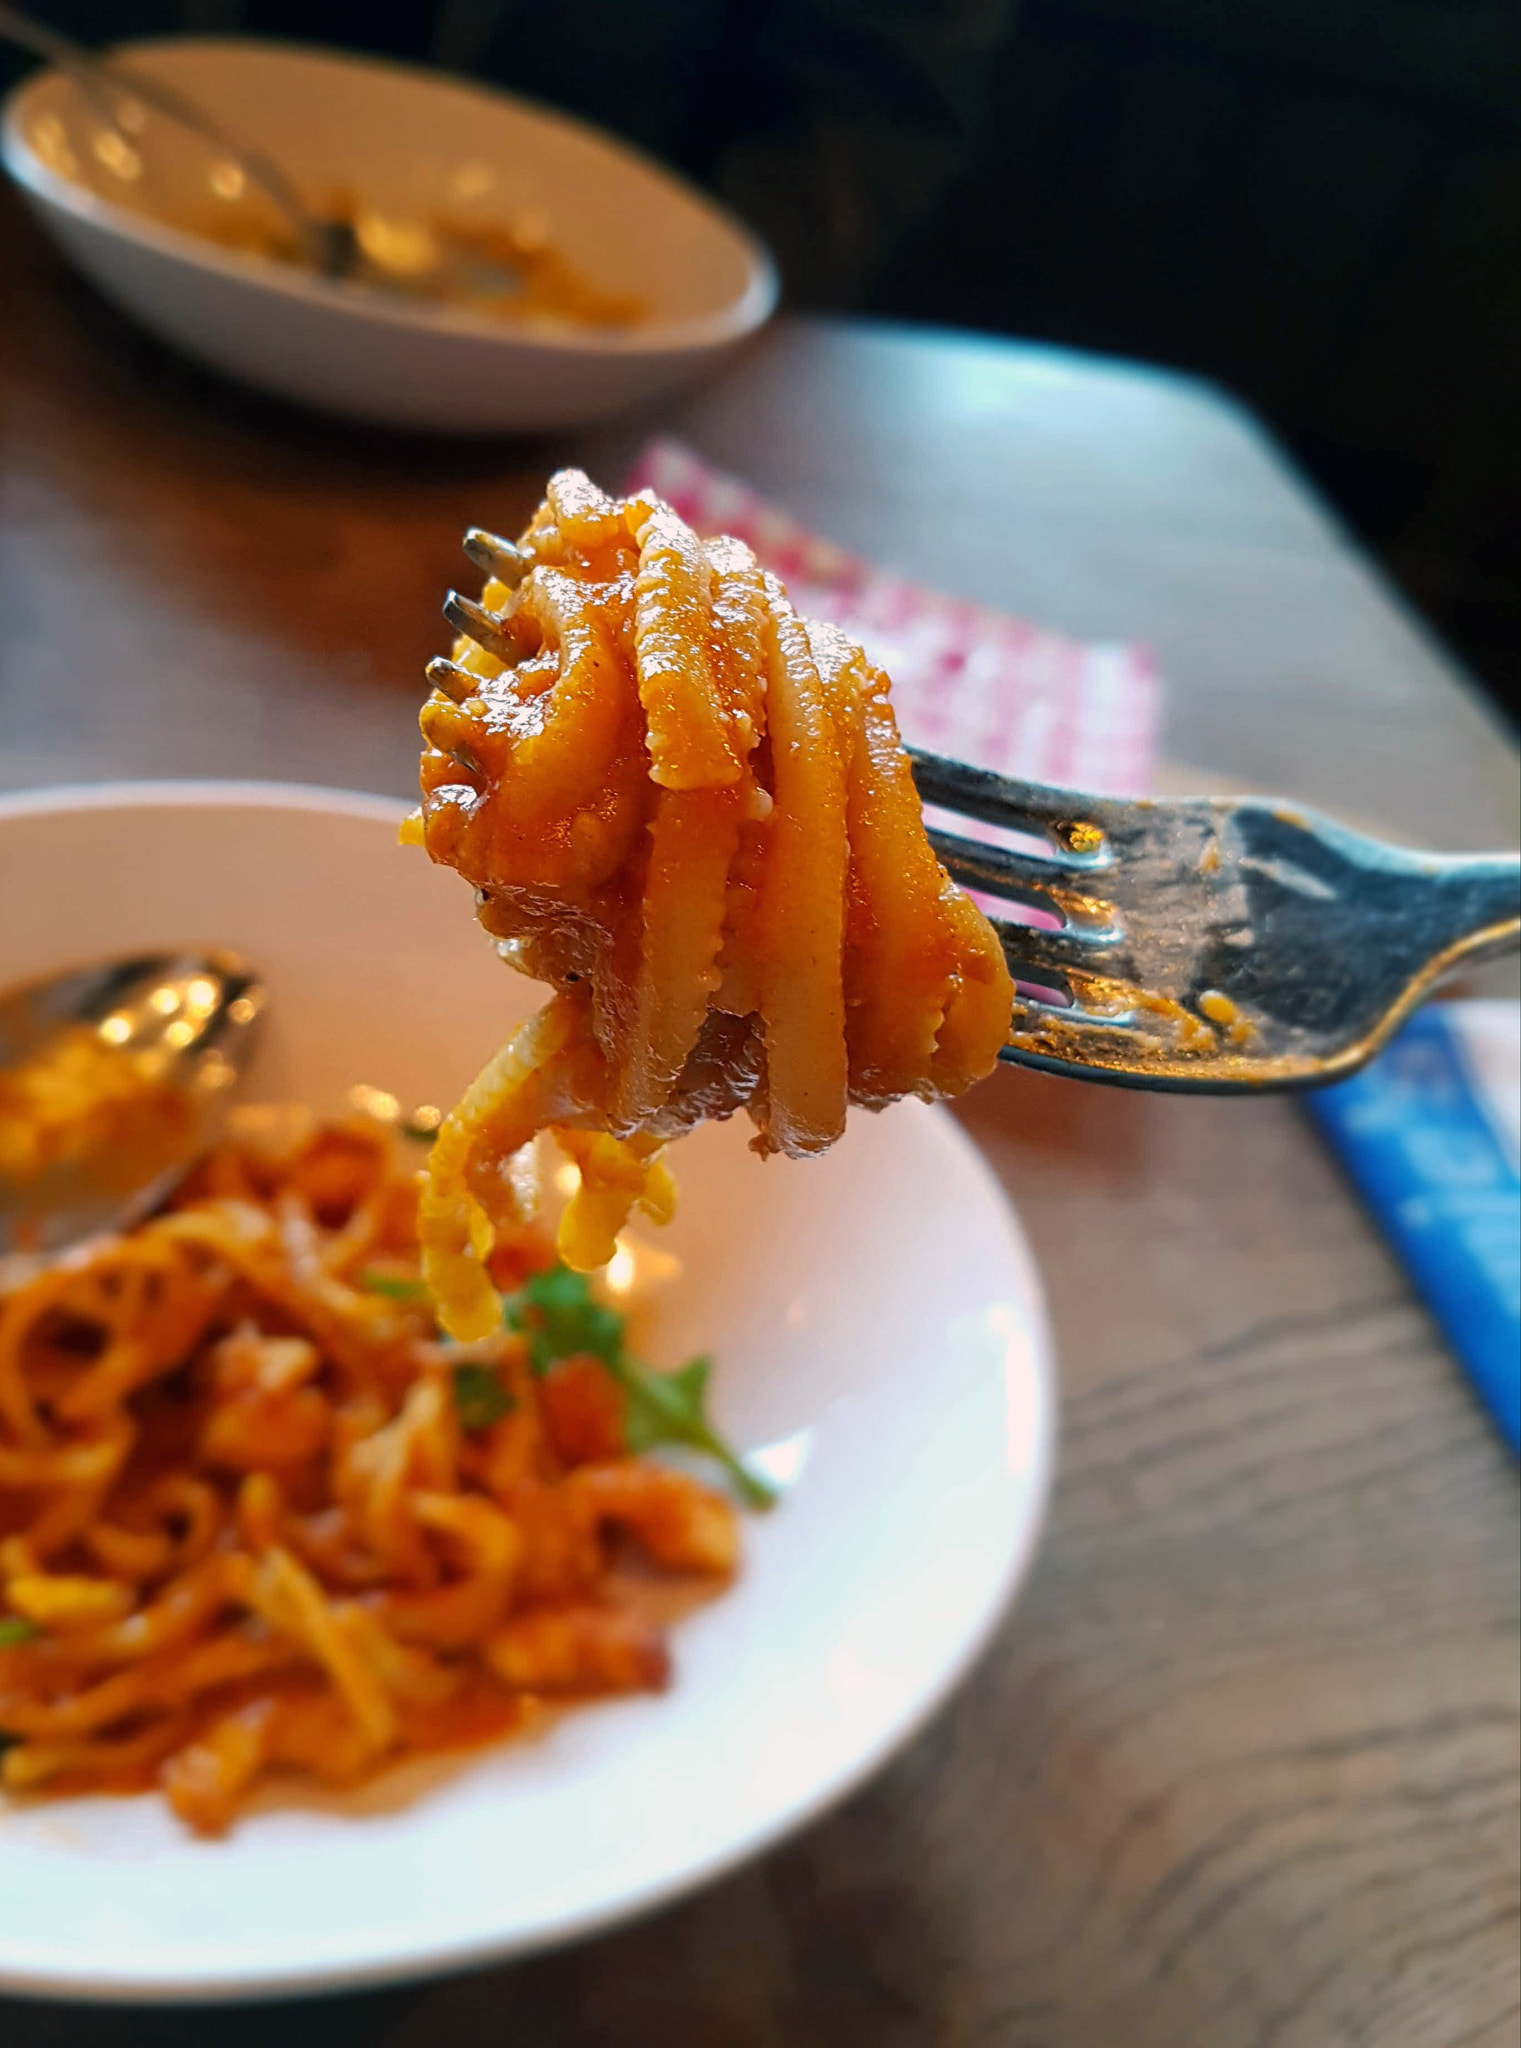 Samsung Galaxy S7 Edge + Samsung Galaxy S7 Edge Rear Camera sample photo. Pasta with seafood photography